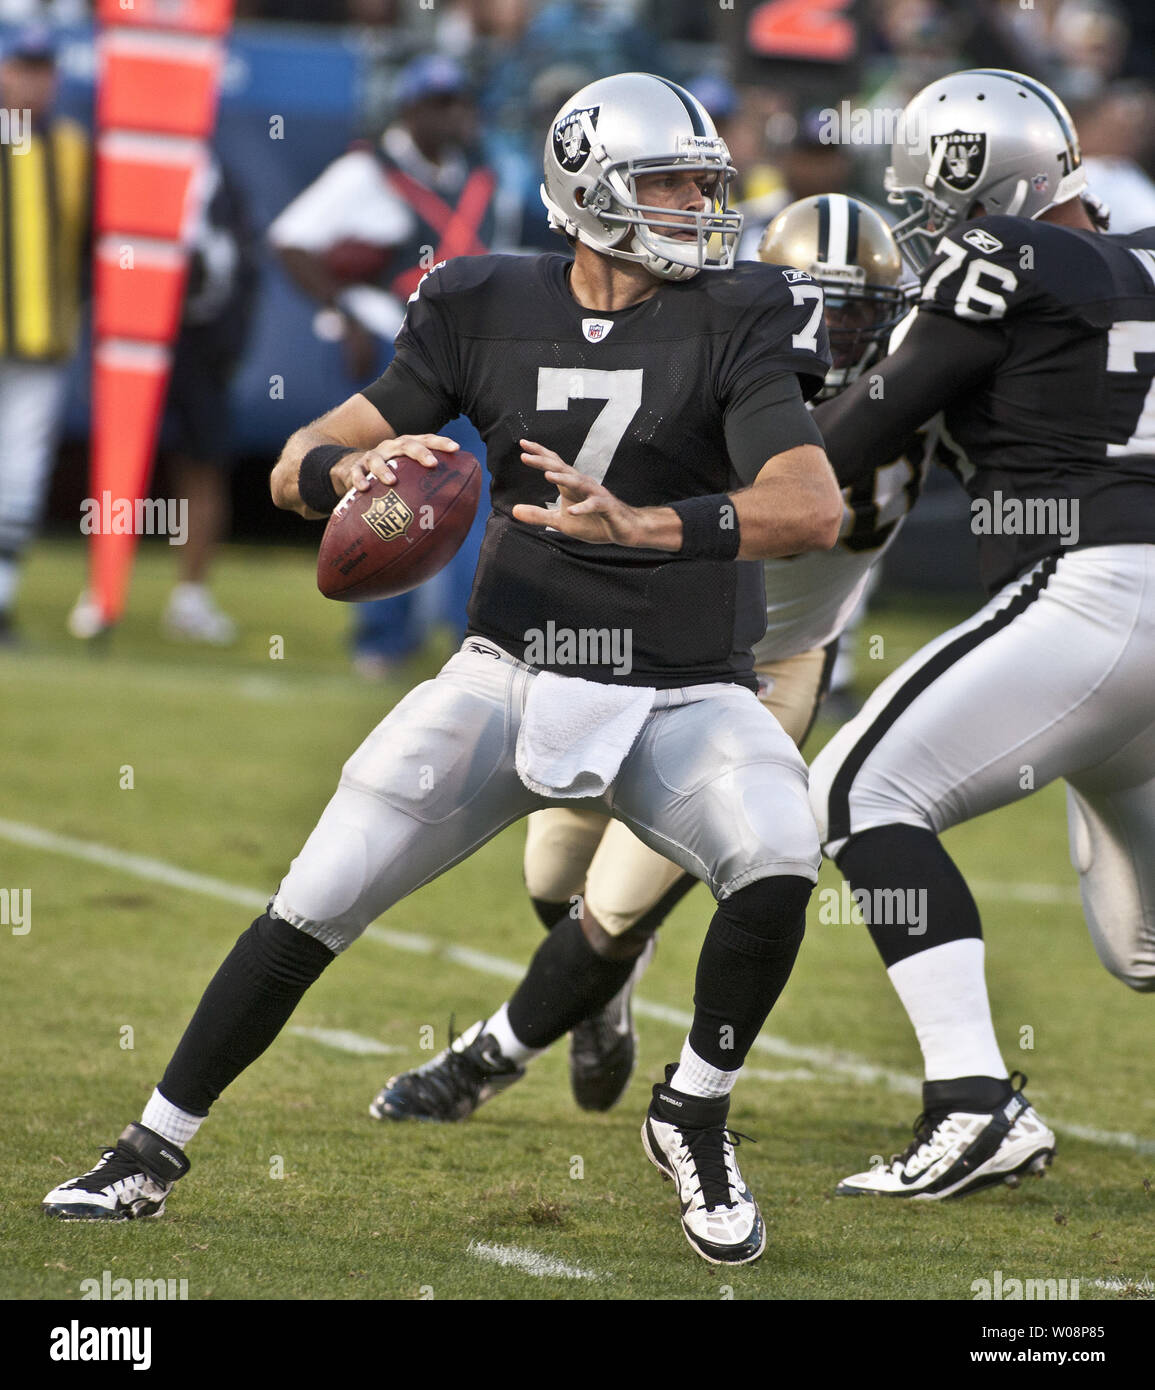 Oakland Raiders QB Kyle Boller (7) looks to pass against the New Orleans Saints at the Coliseum in Oakland, California on August 28, 2011.   UPI/Terry Schmitt Stock Photo